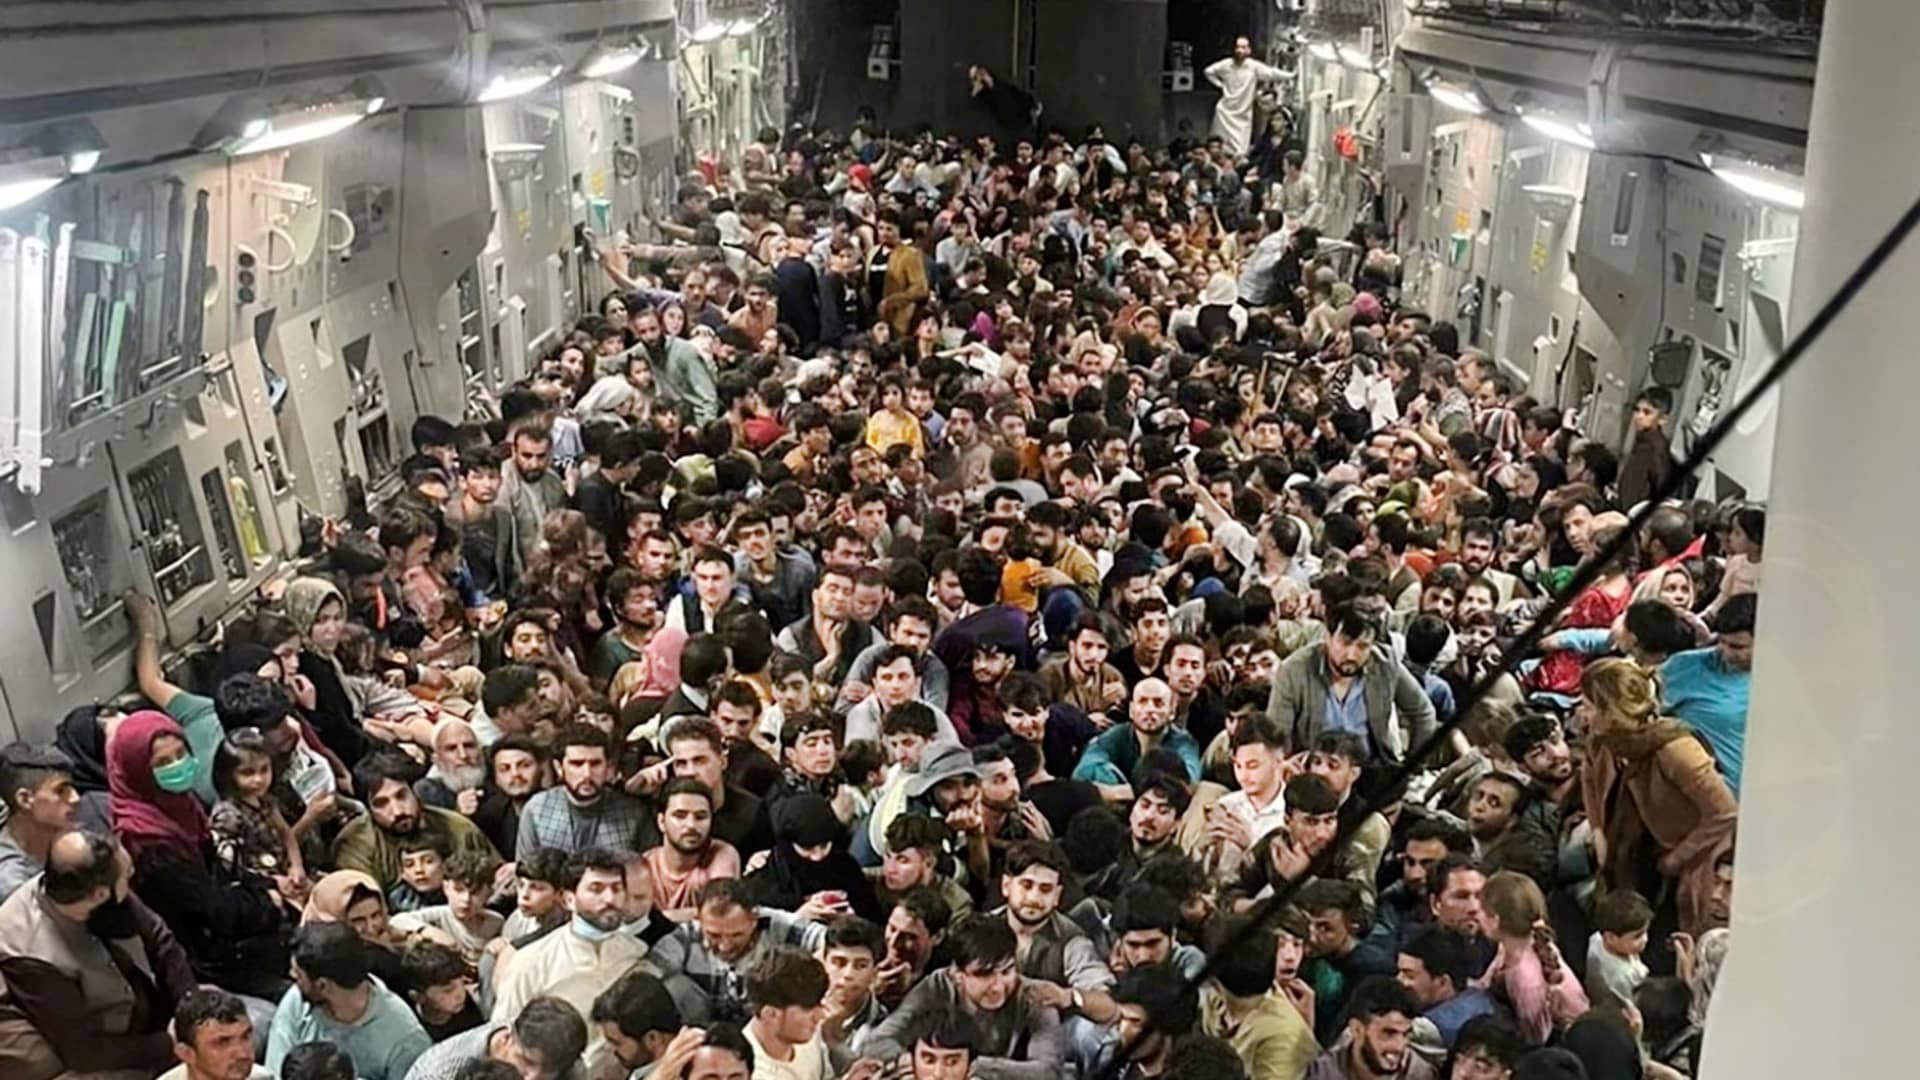 Evacuees crowd the interior of a U.S. Air Force C-17 Globemaster III transport aircraft, carrying some 640 Afghans to Qatar from Kabul, Afghanistan August 15, 2021.